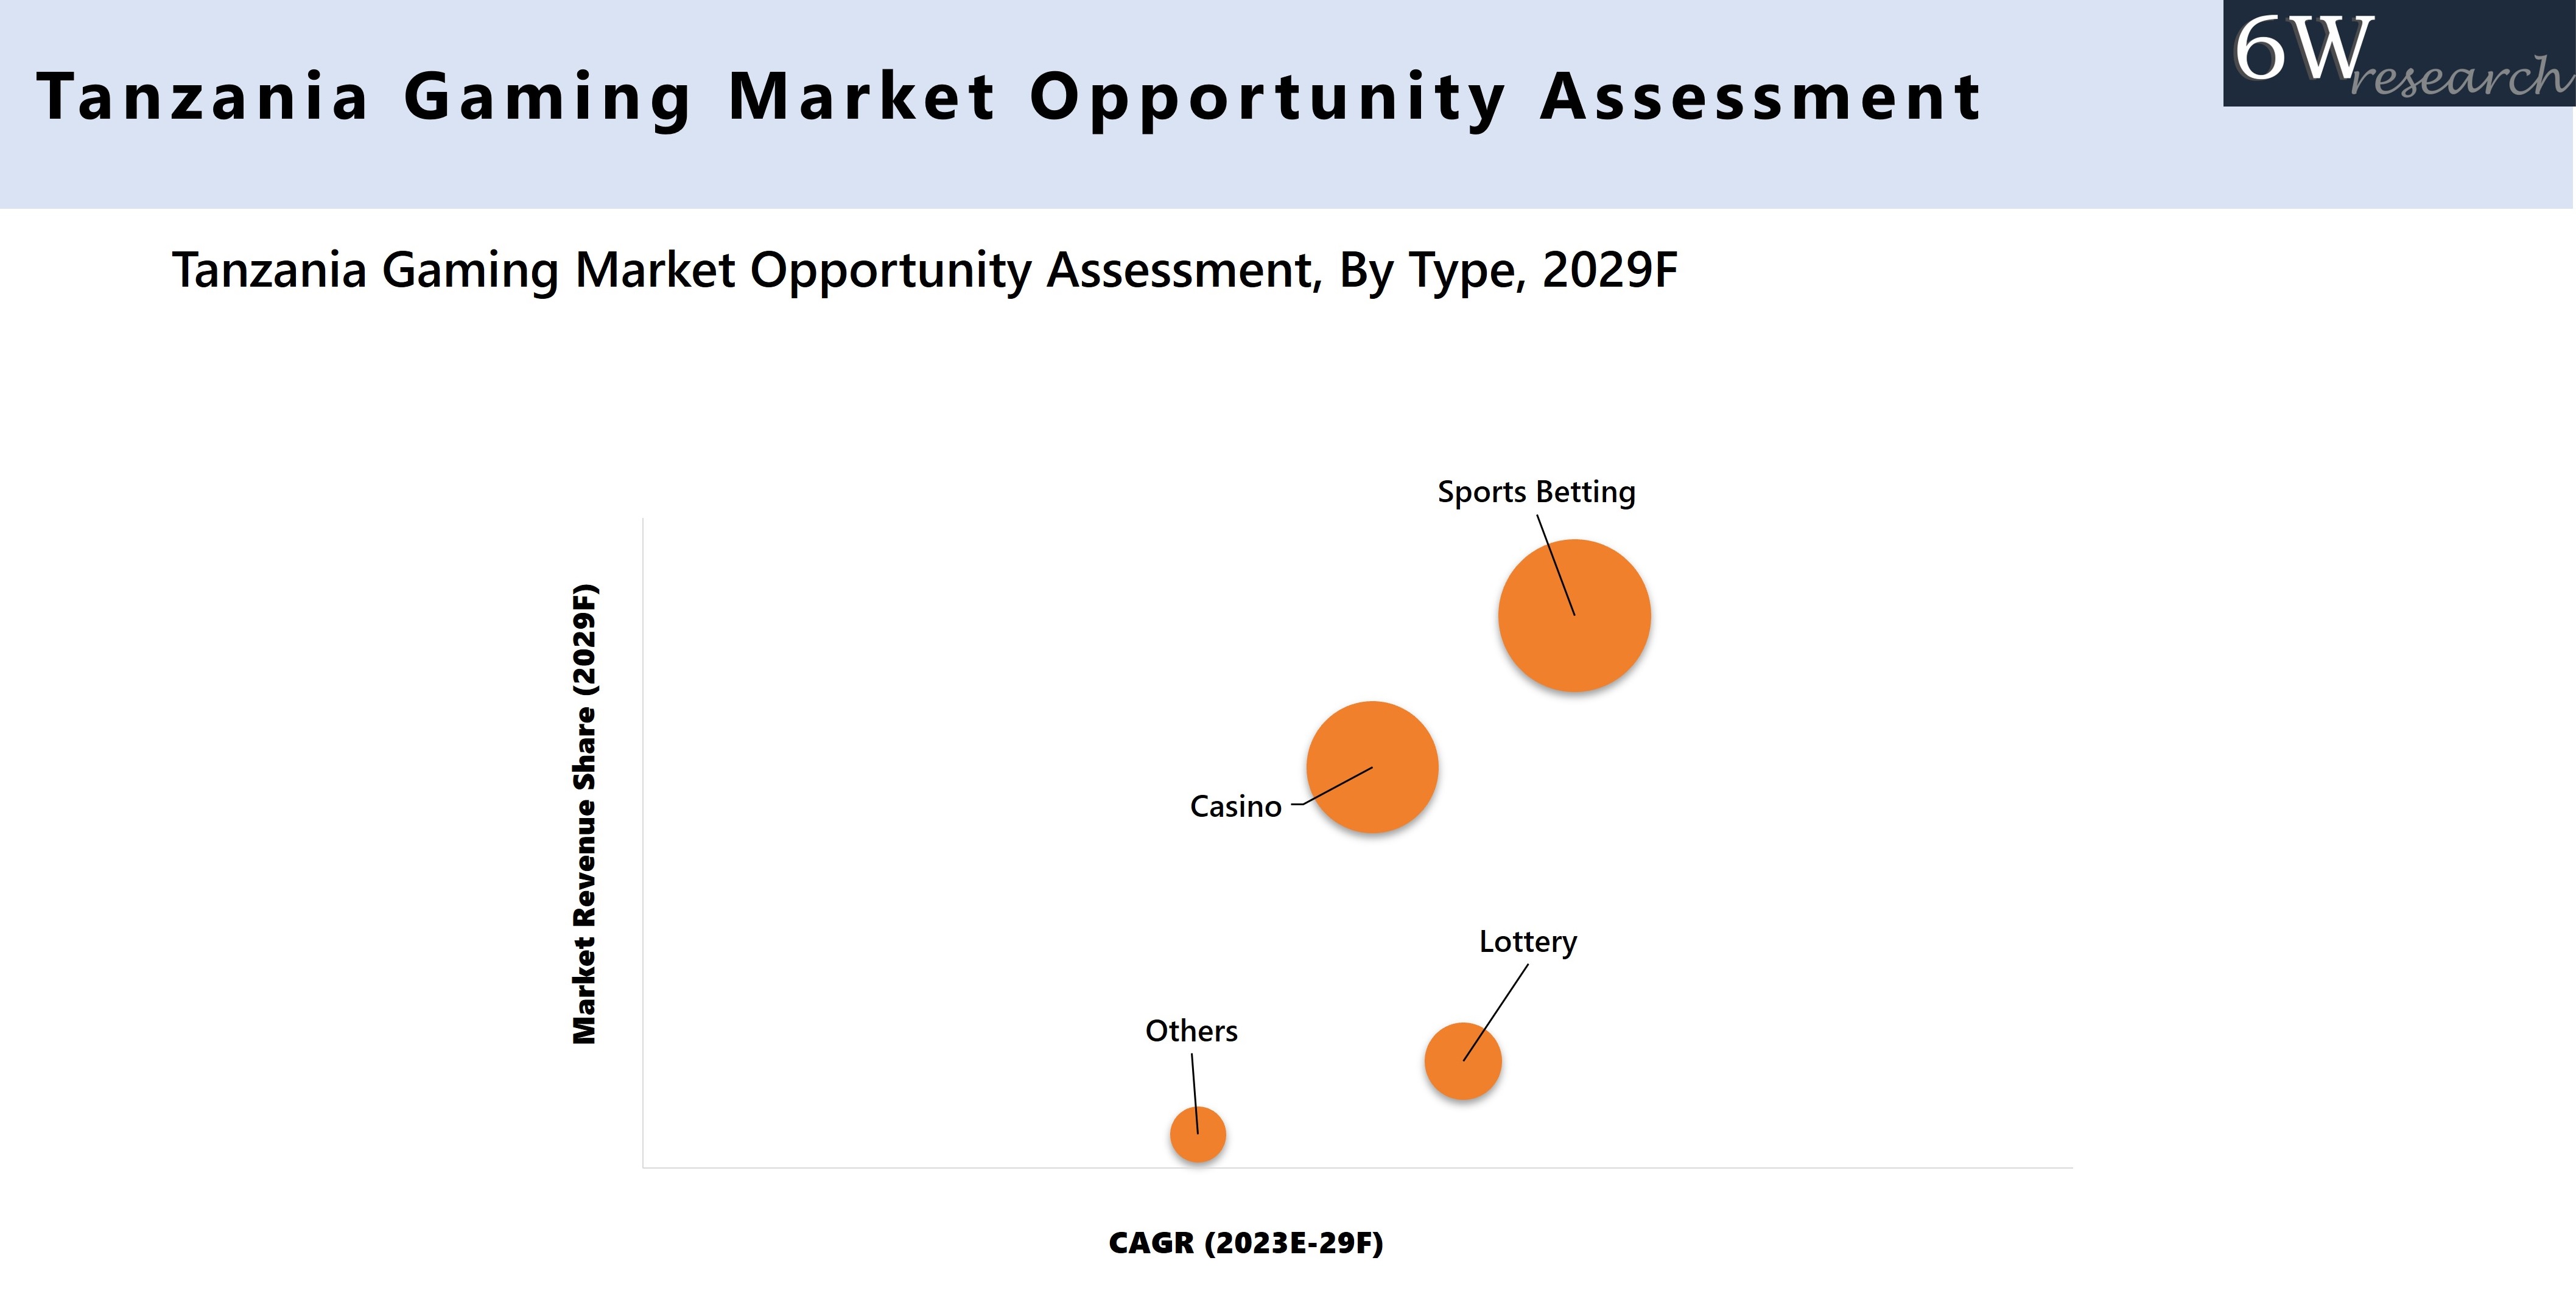 Tanzania Gaming Market Opportunity Assessment